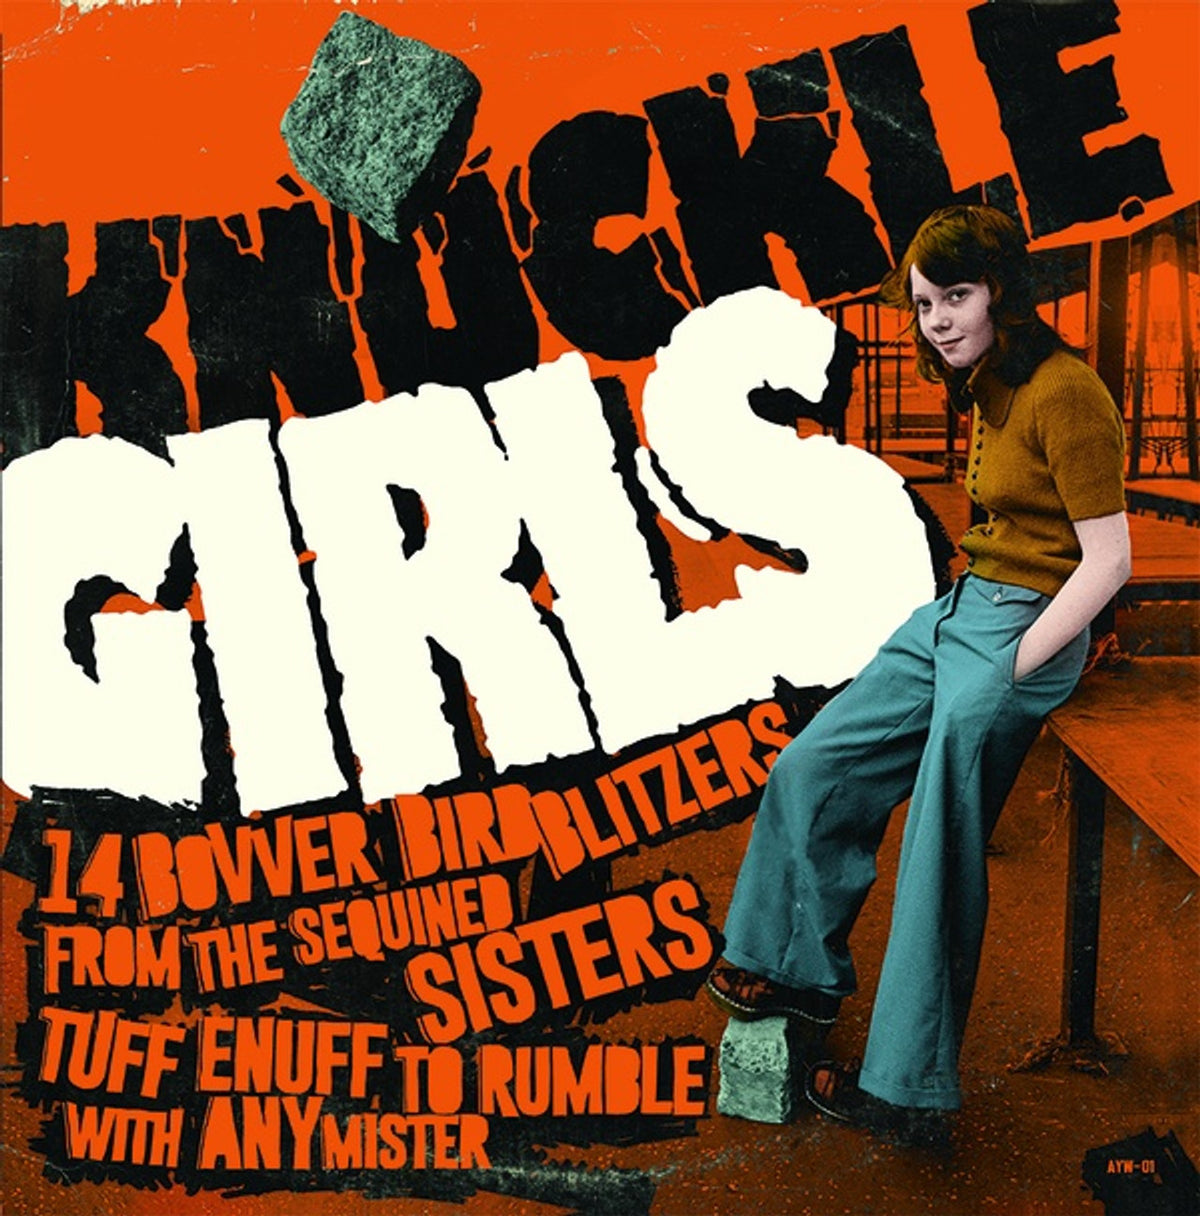 V/A – Knuckle Girls: 14 Bovver Blitzers From The Sequined Sisters LP